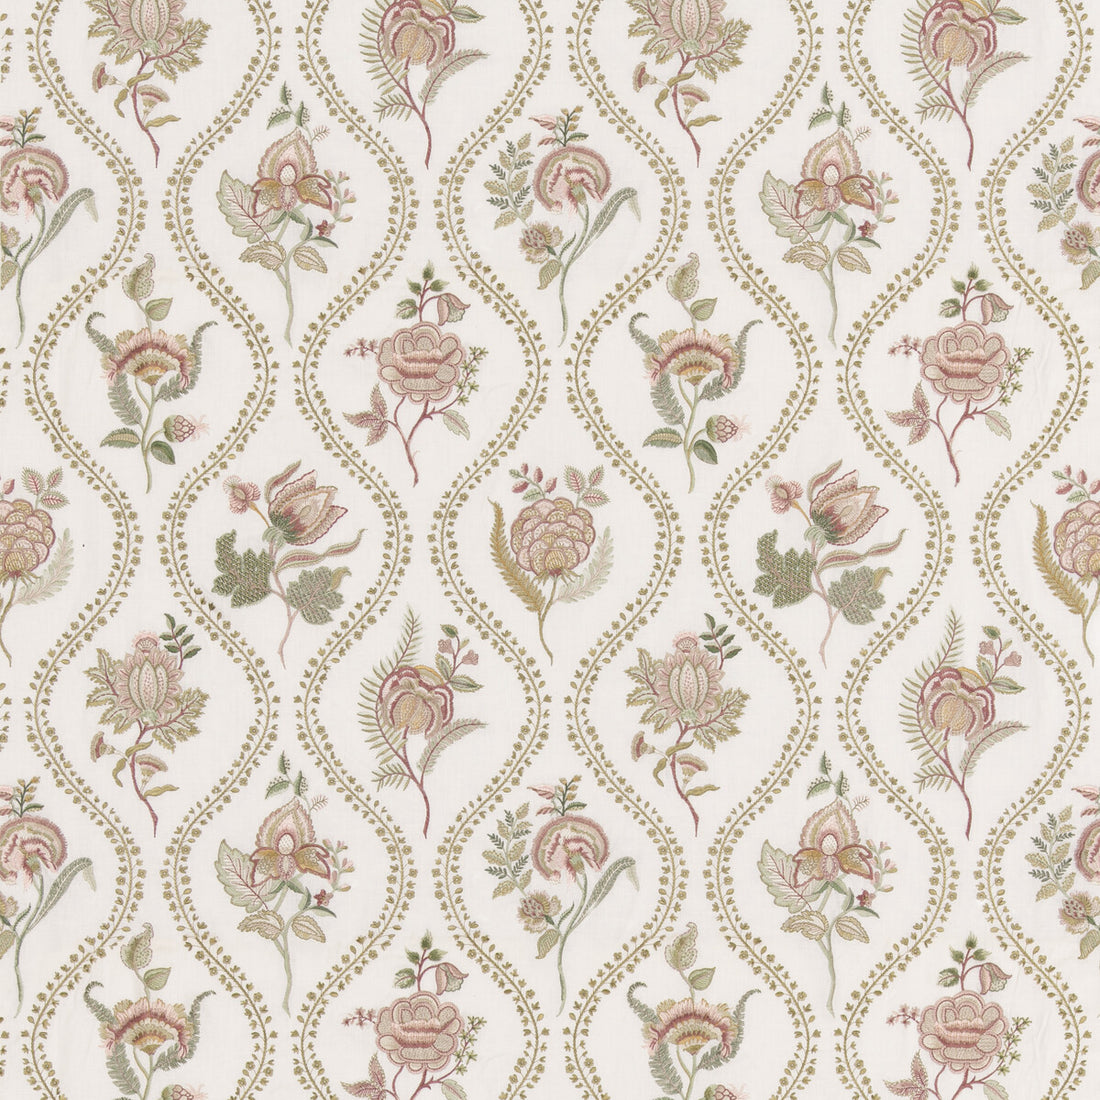 Burford Embroidery fabric in rose/cream color - pattern BF11025.4.0 - by G P &amp; J Baker in the Burford collection